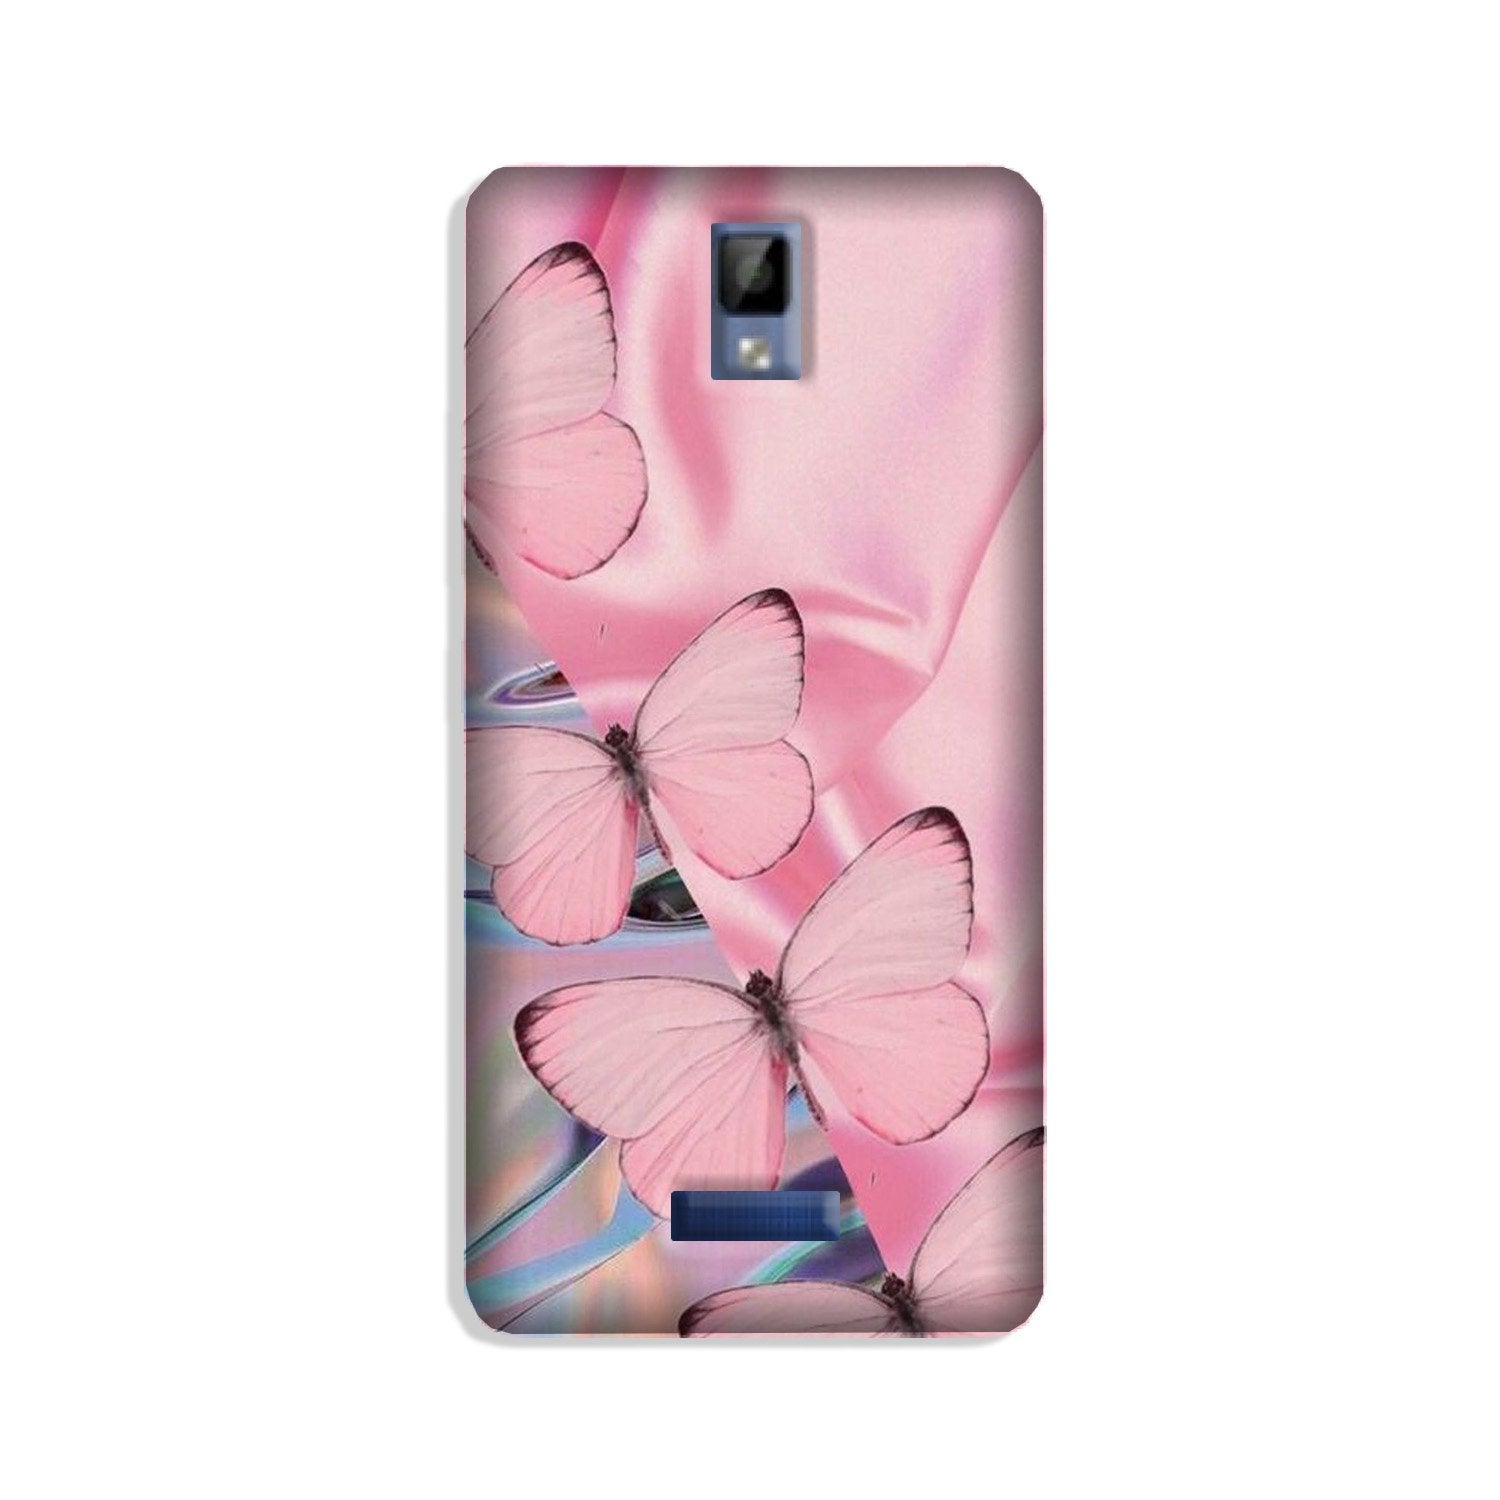 Butterflies Case for Gionee P7